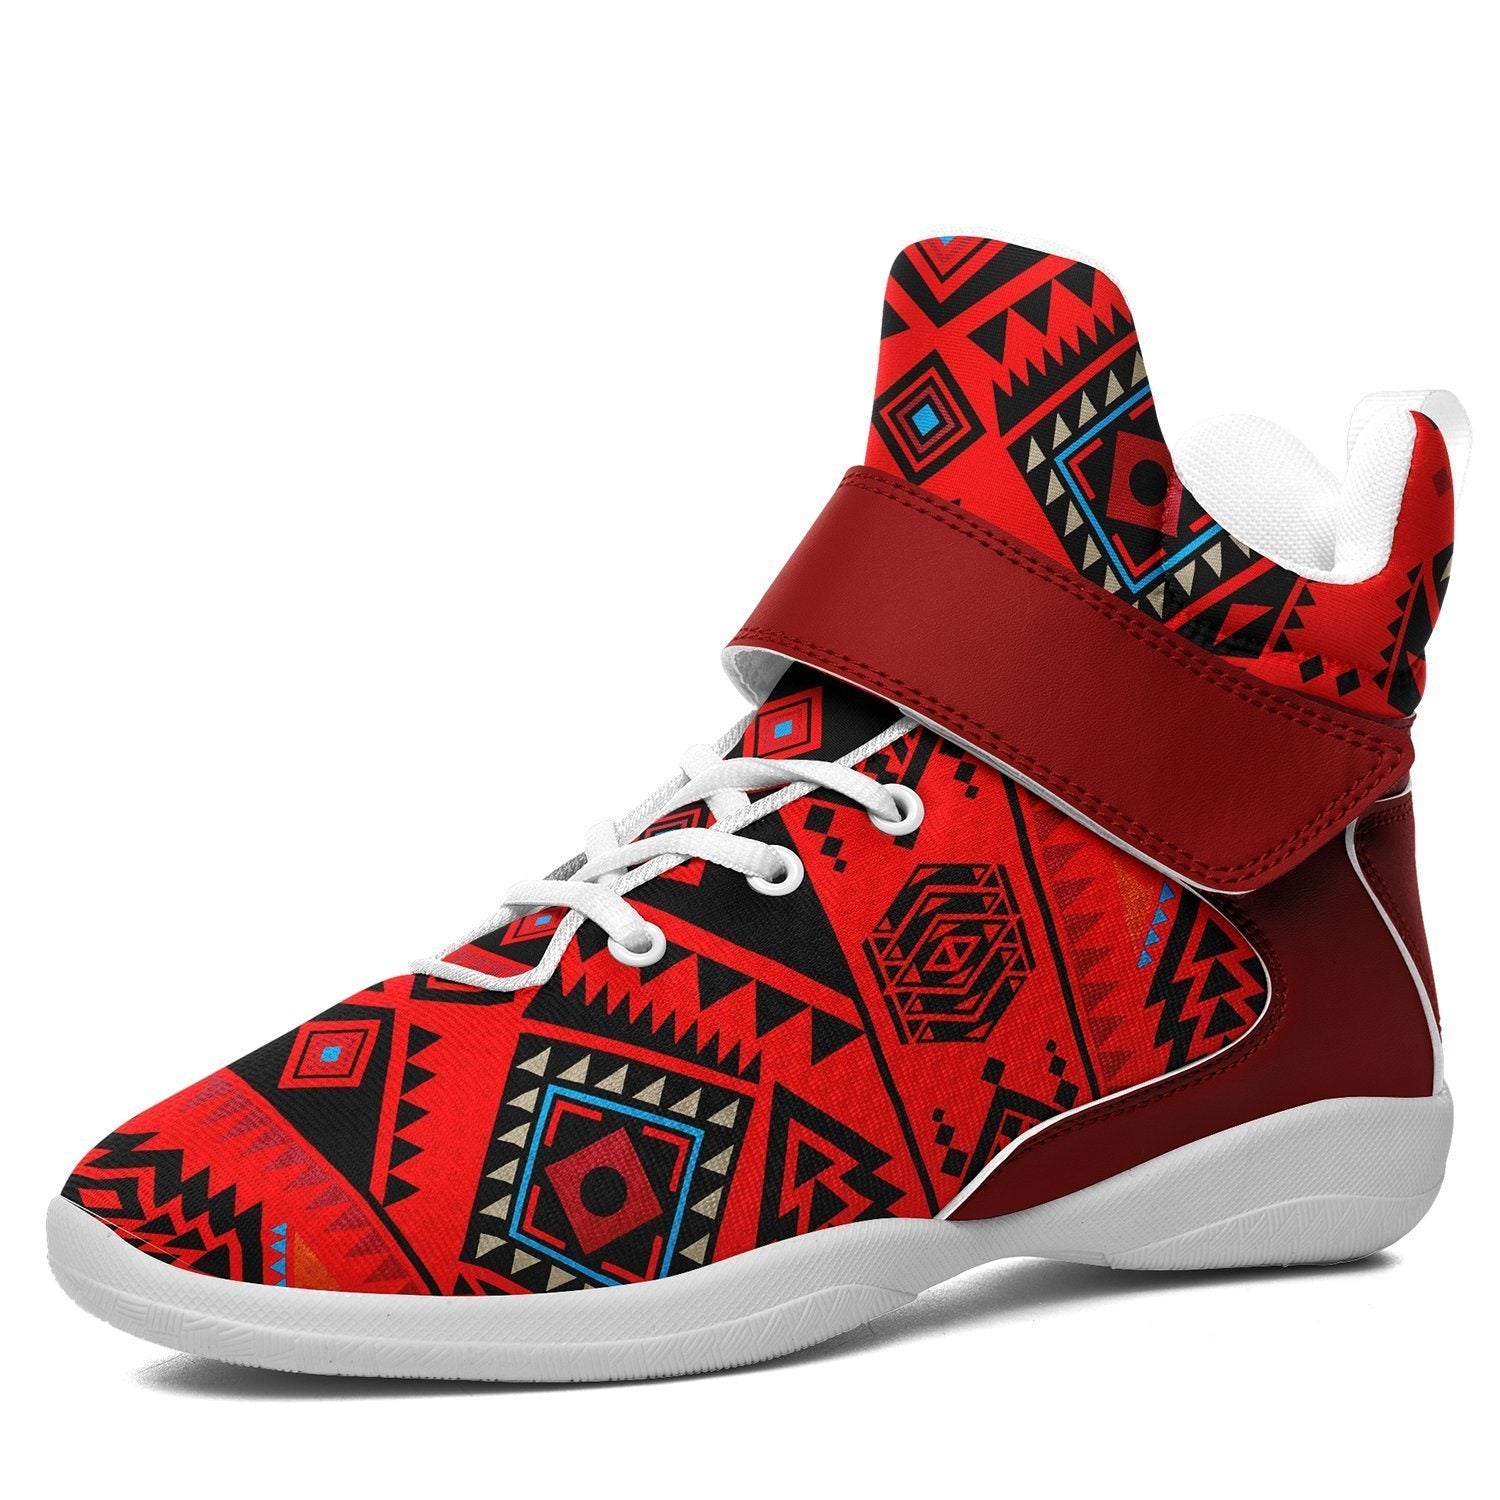 California Coast Mask Kid's Ipottaa Basketball / Sport High Top Shoes 49 Dzine US Women 4.5 / US Youth 3.5 / EUR 35 White Sole with Dark Red Strap 